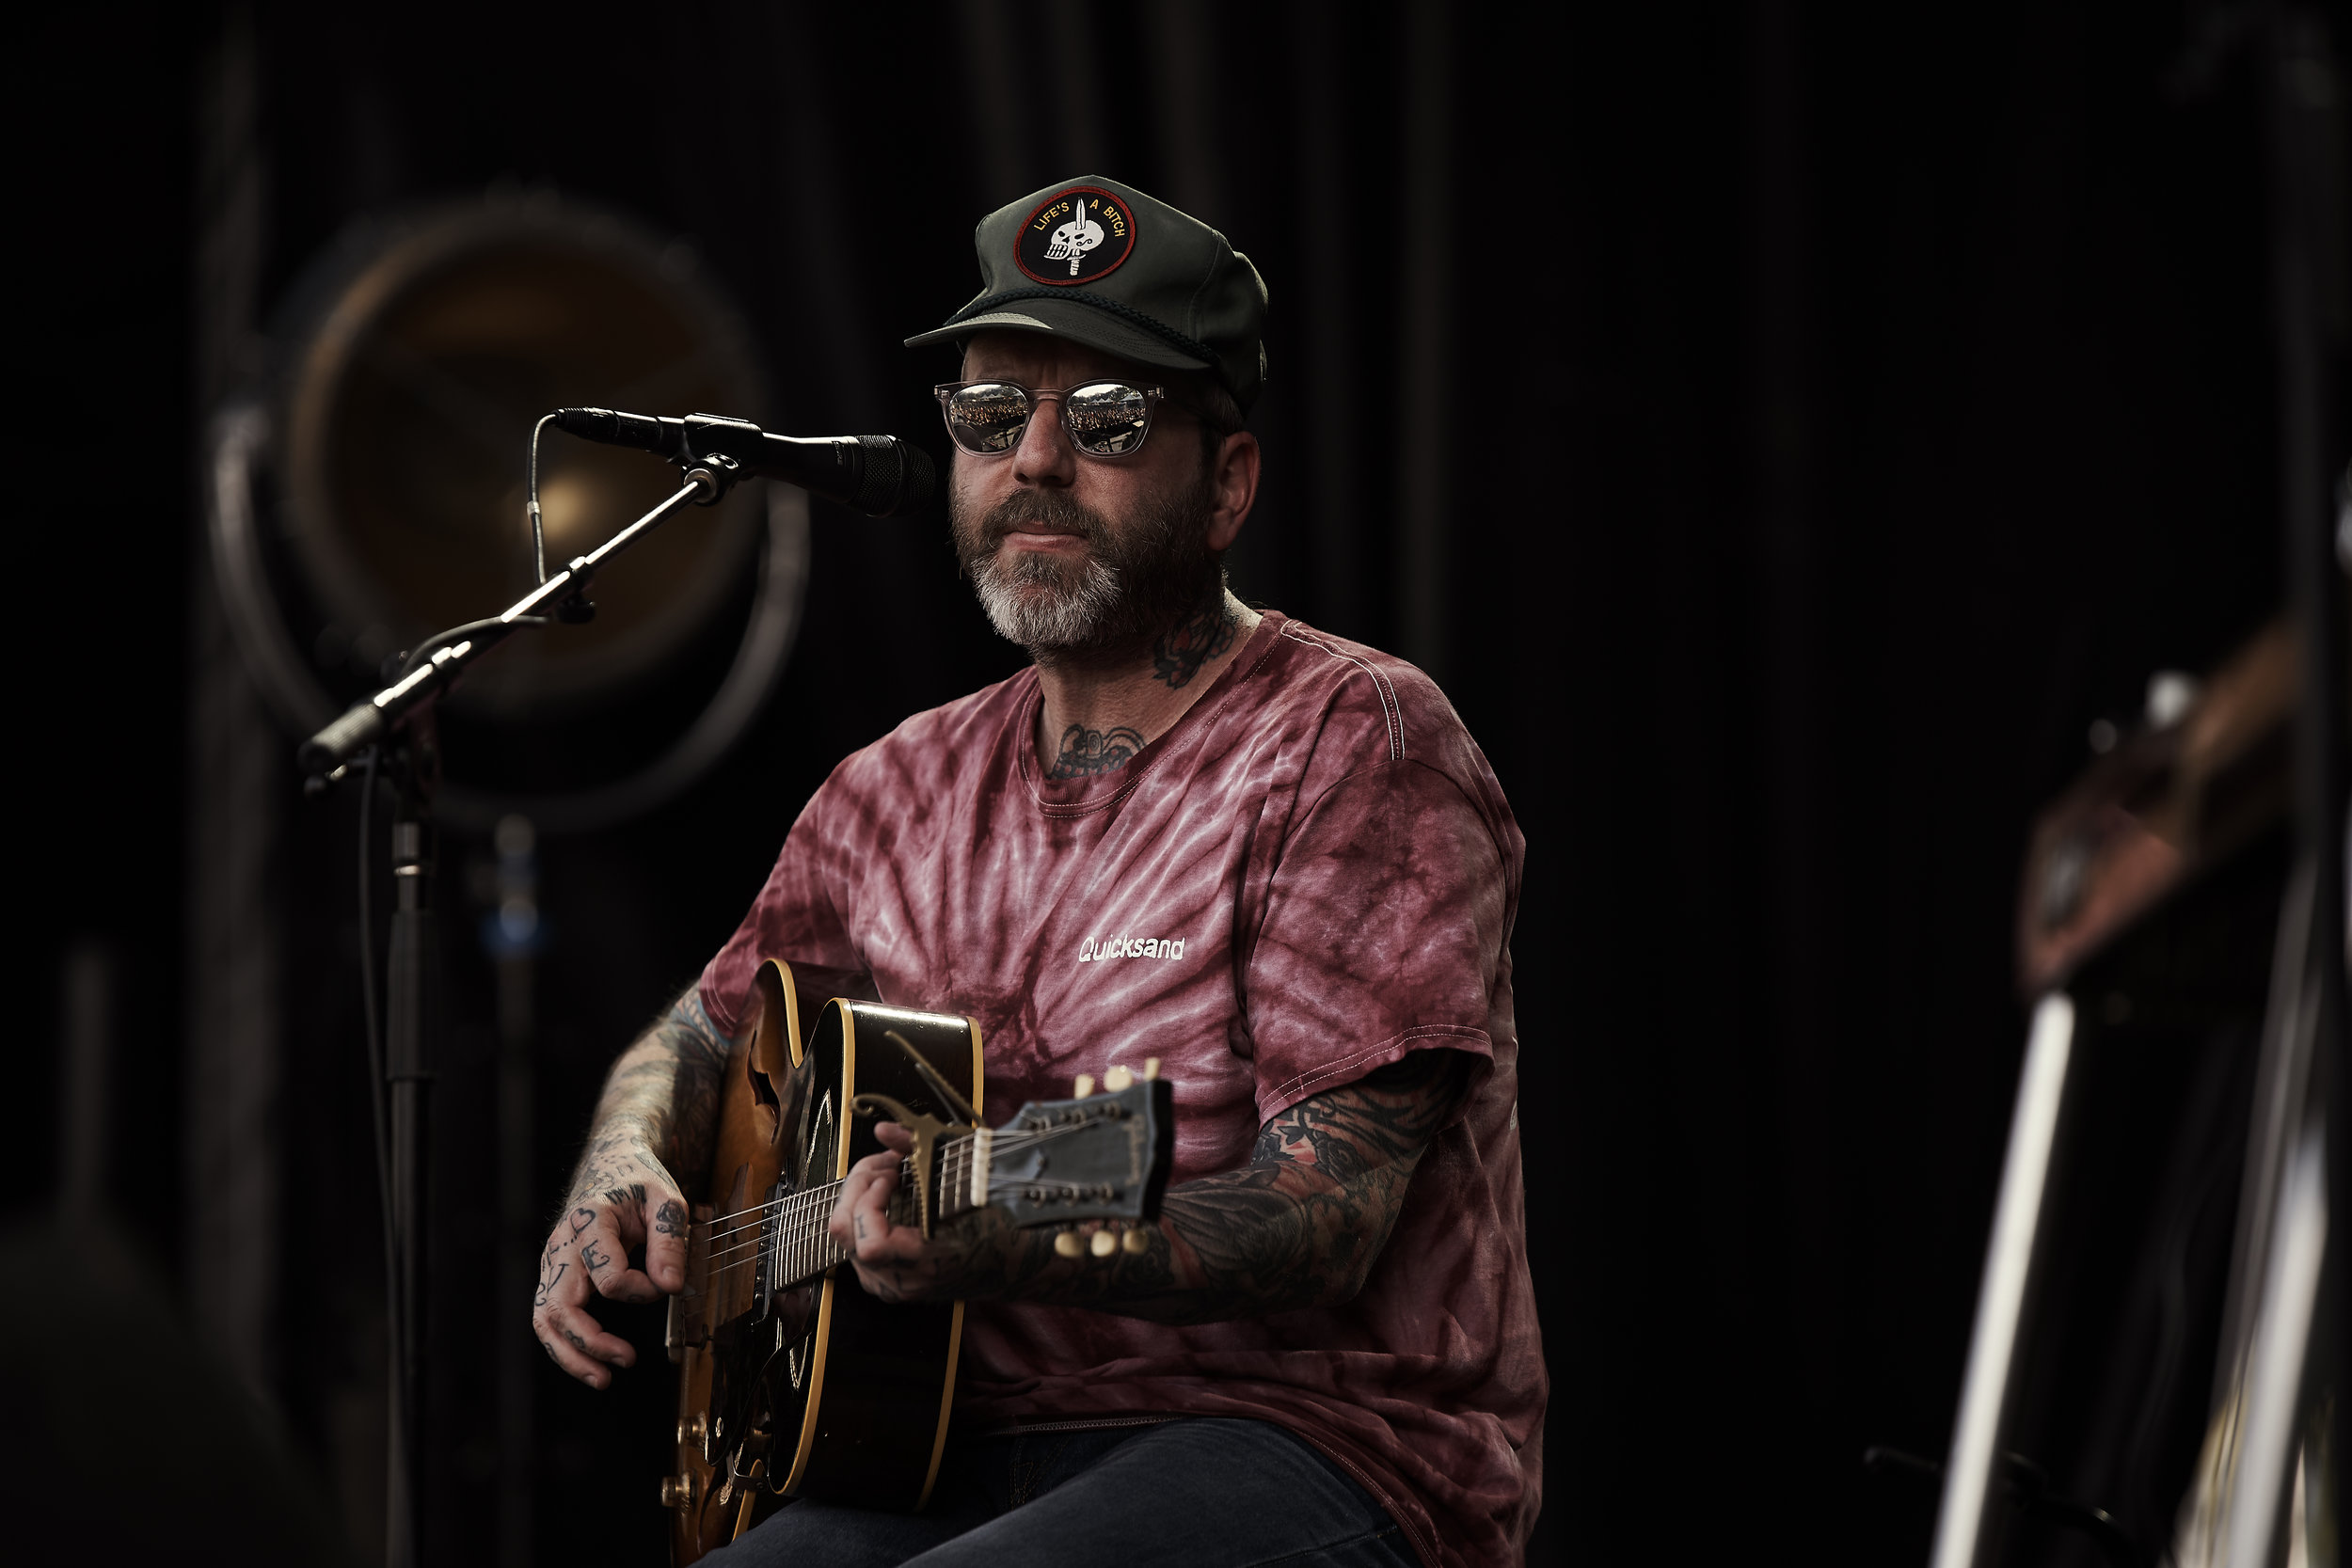    City and Colour     // 2019-06-27 //   Common Ground Music Festival     at    Adado Riverfront Park  - Lansing, MI // Photos by  Attila Hardy  